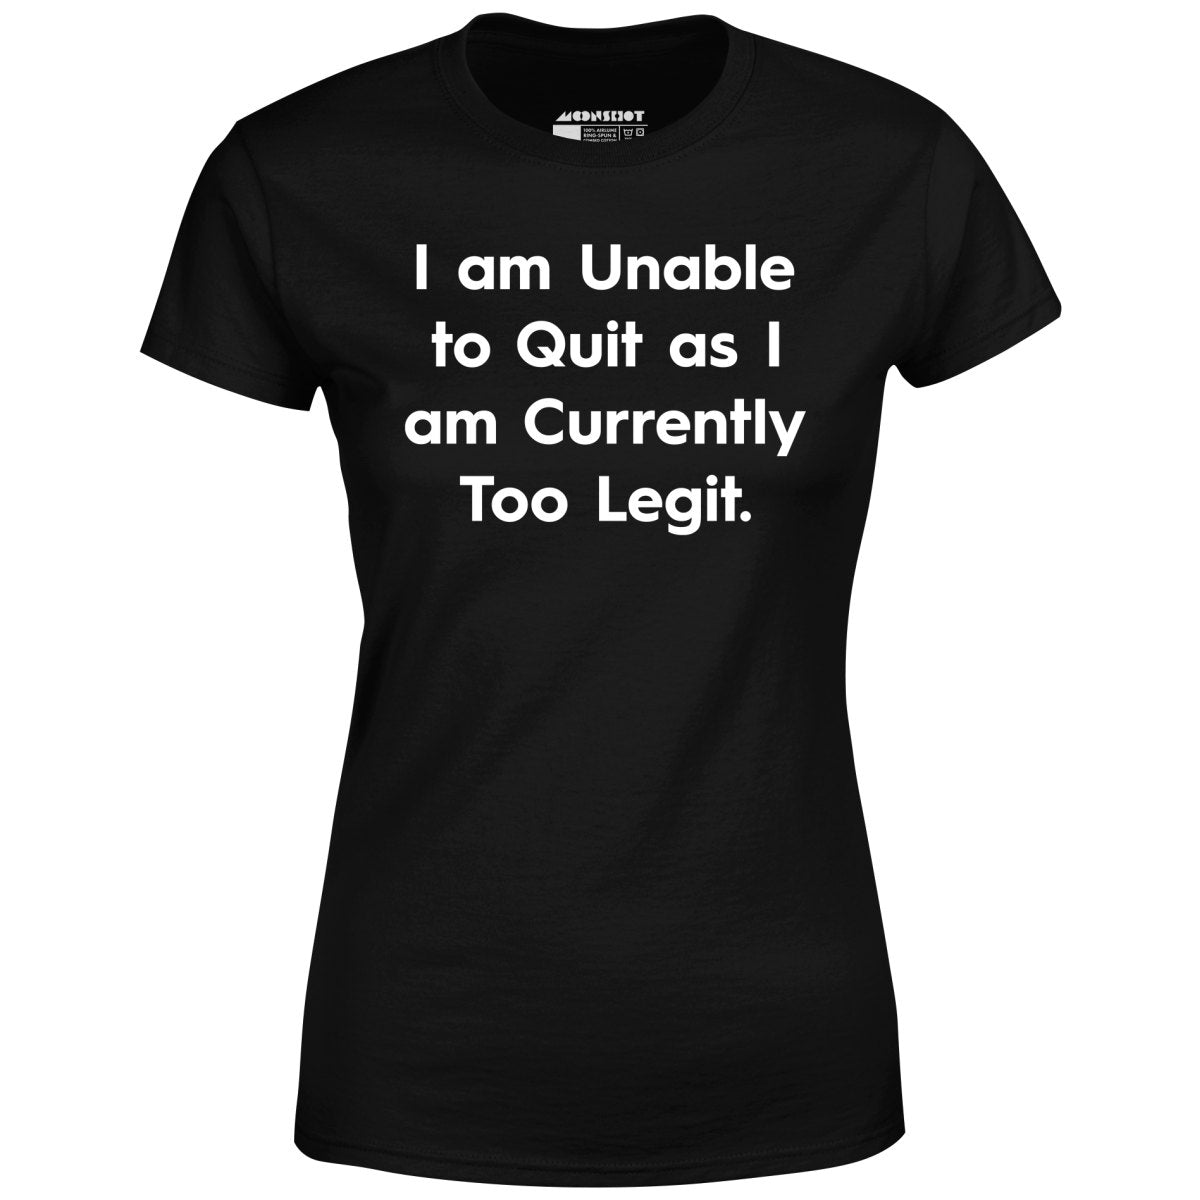 I am Unable to Quit as I am Currently Too Legit - Women's T-Shirt